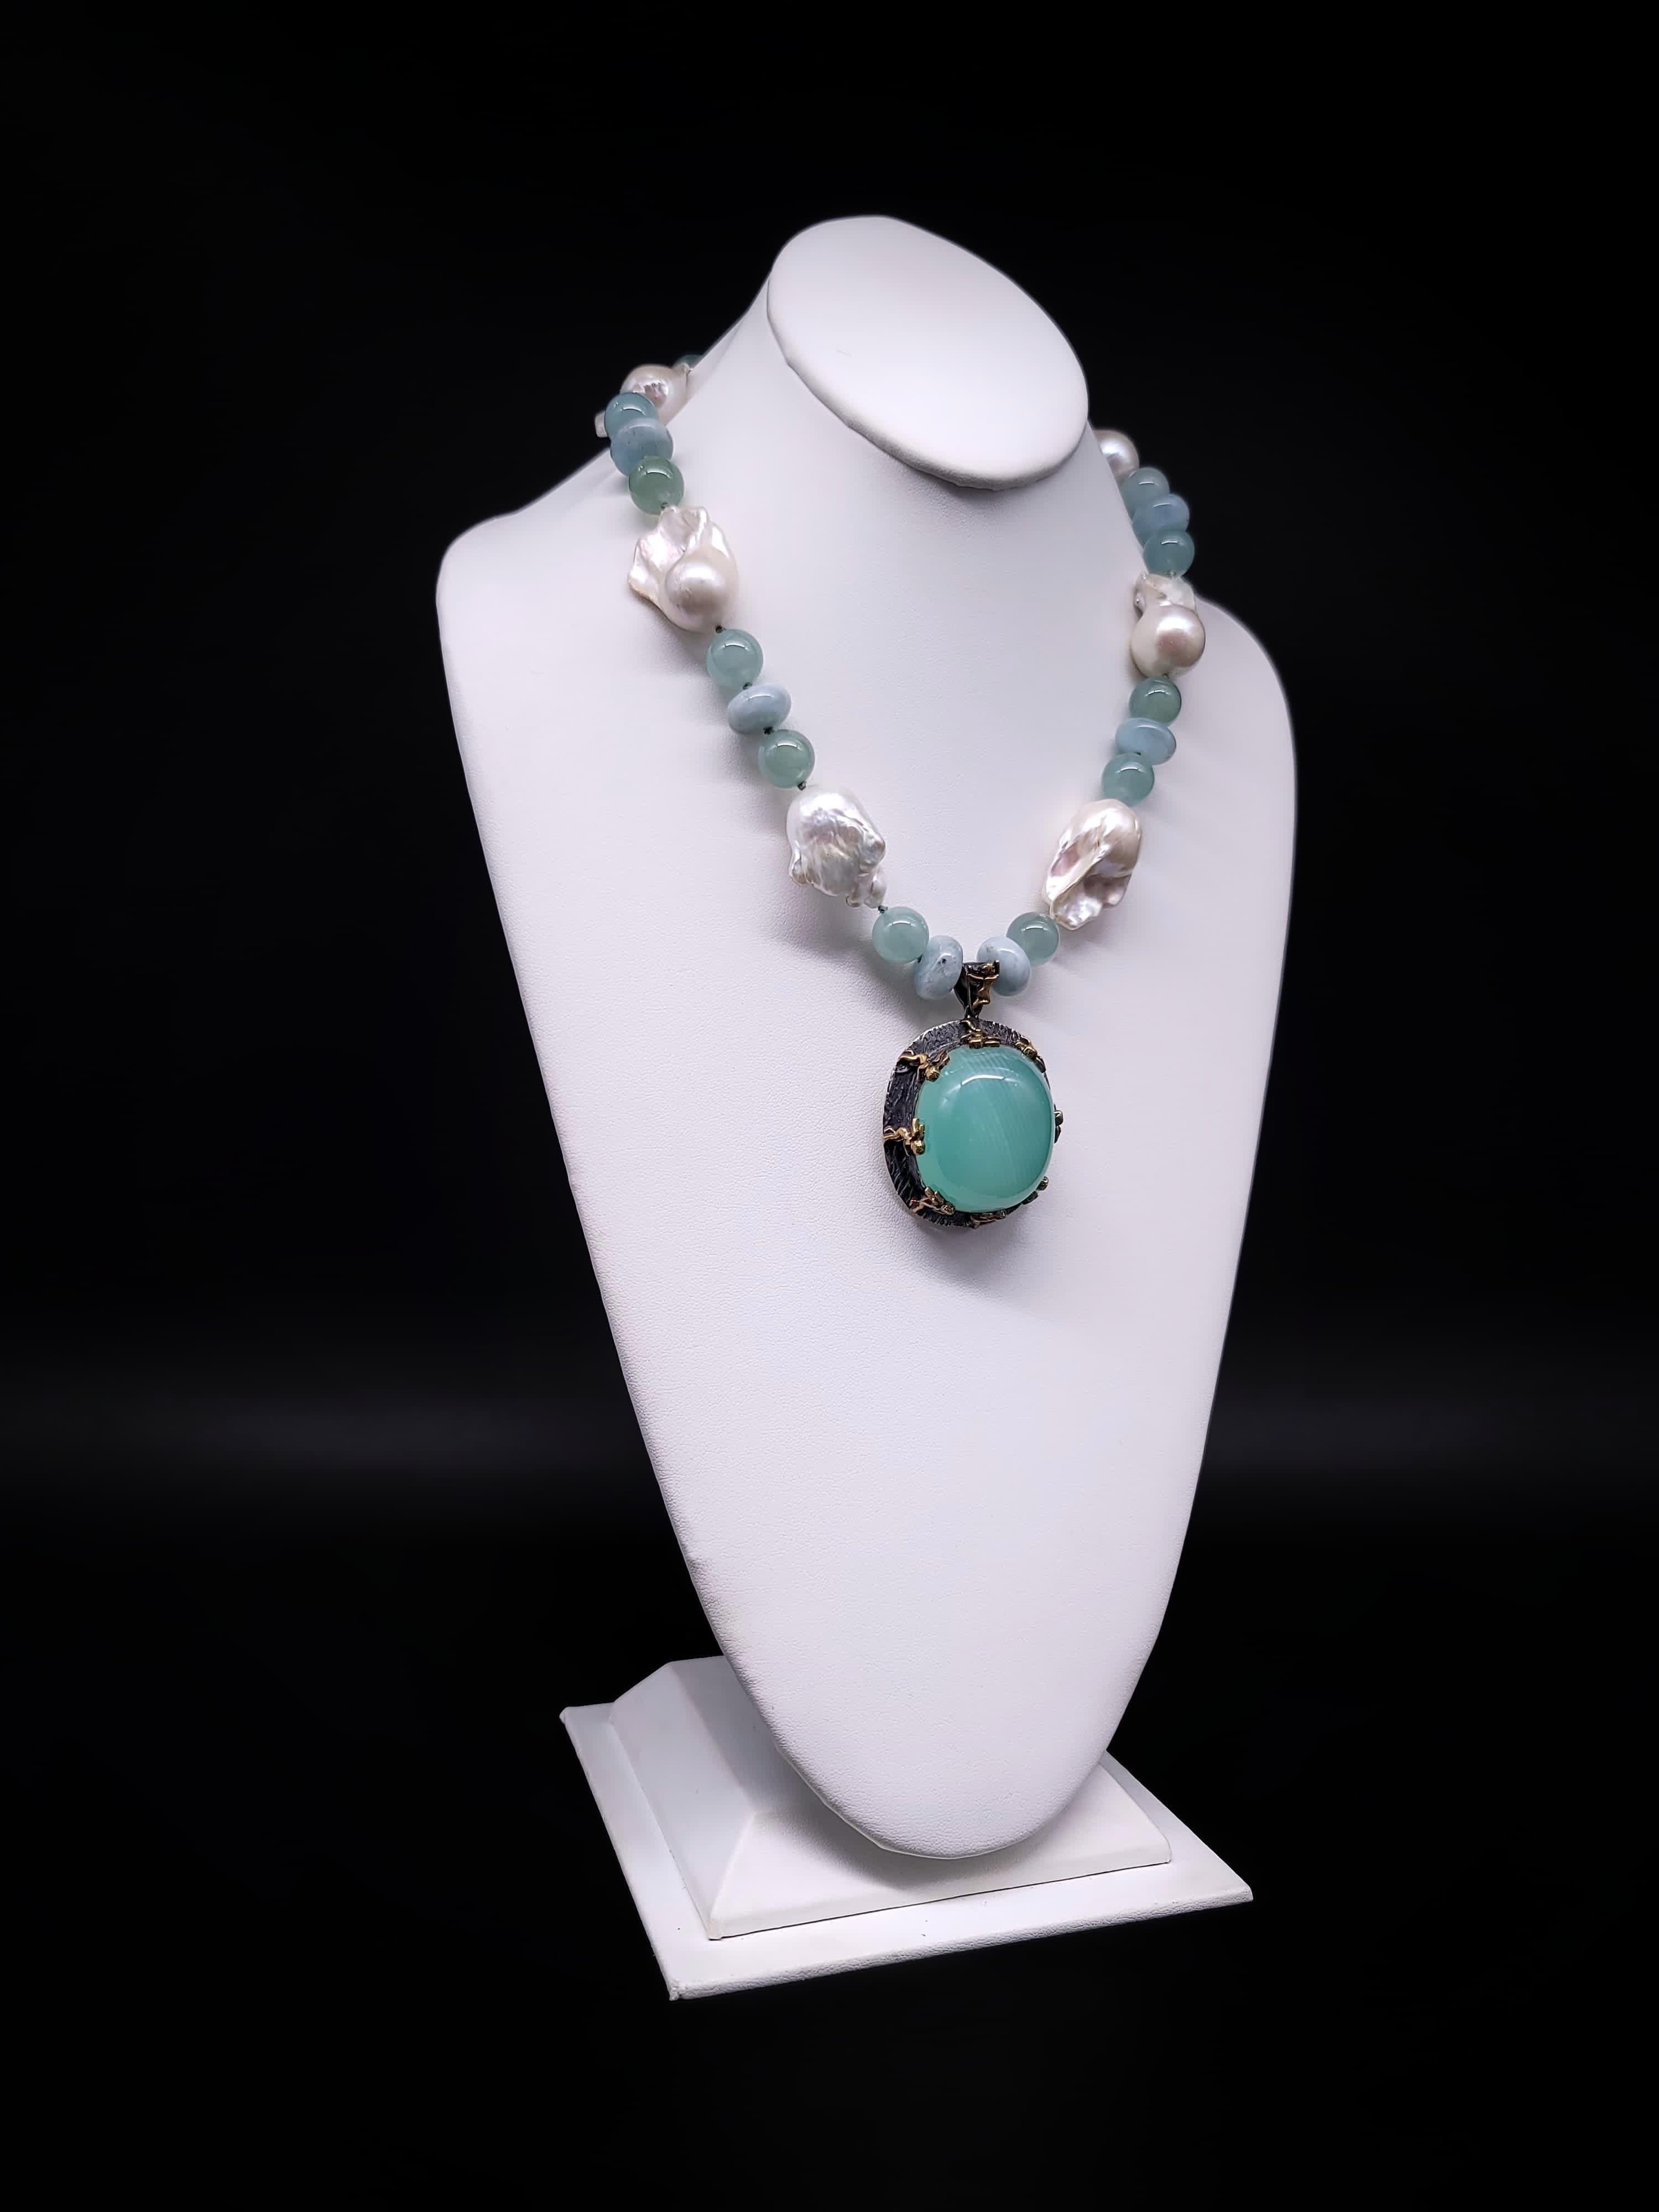 One-of-a-Kind

This exceptional piece of jewelry is a one-of-a-kind, (Pendant designed by Bora ) Sterling Silver pendant necklace that showcases a breathtaking Aquamarine gemstone held up by eight charming Cupids. The pendant has been meticulously